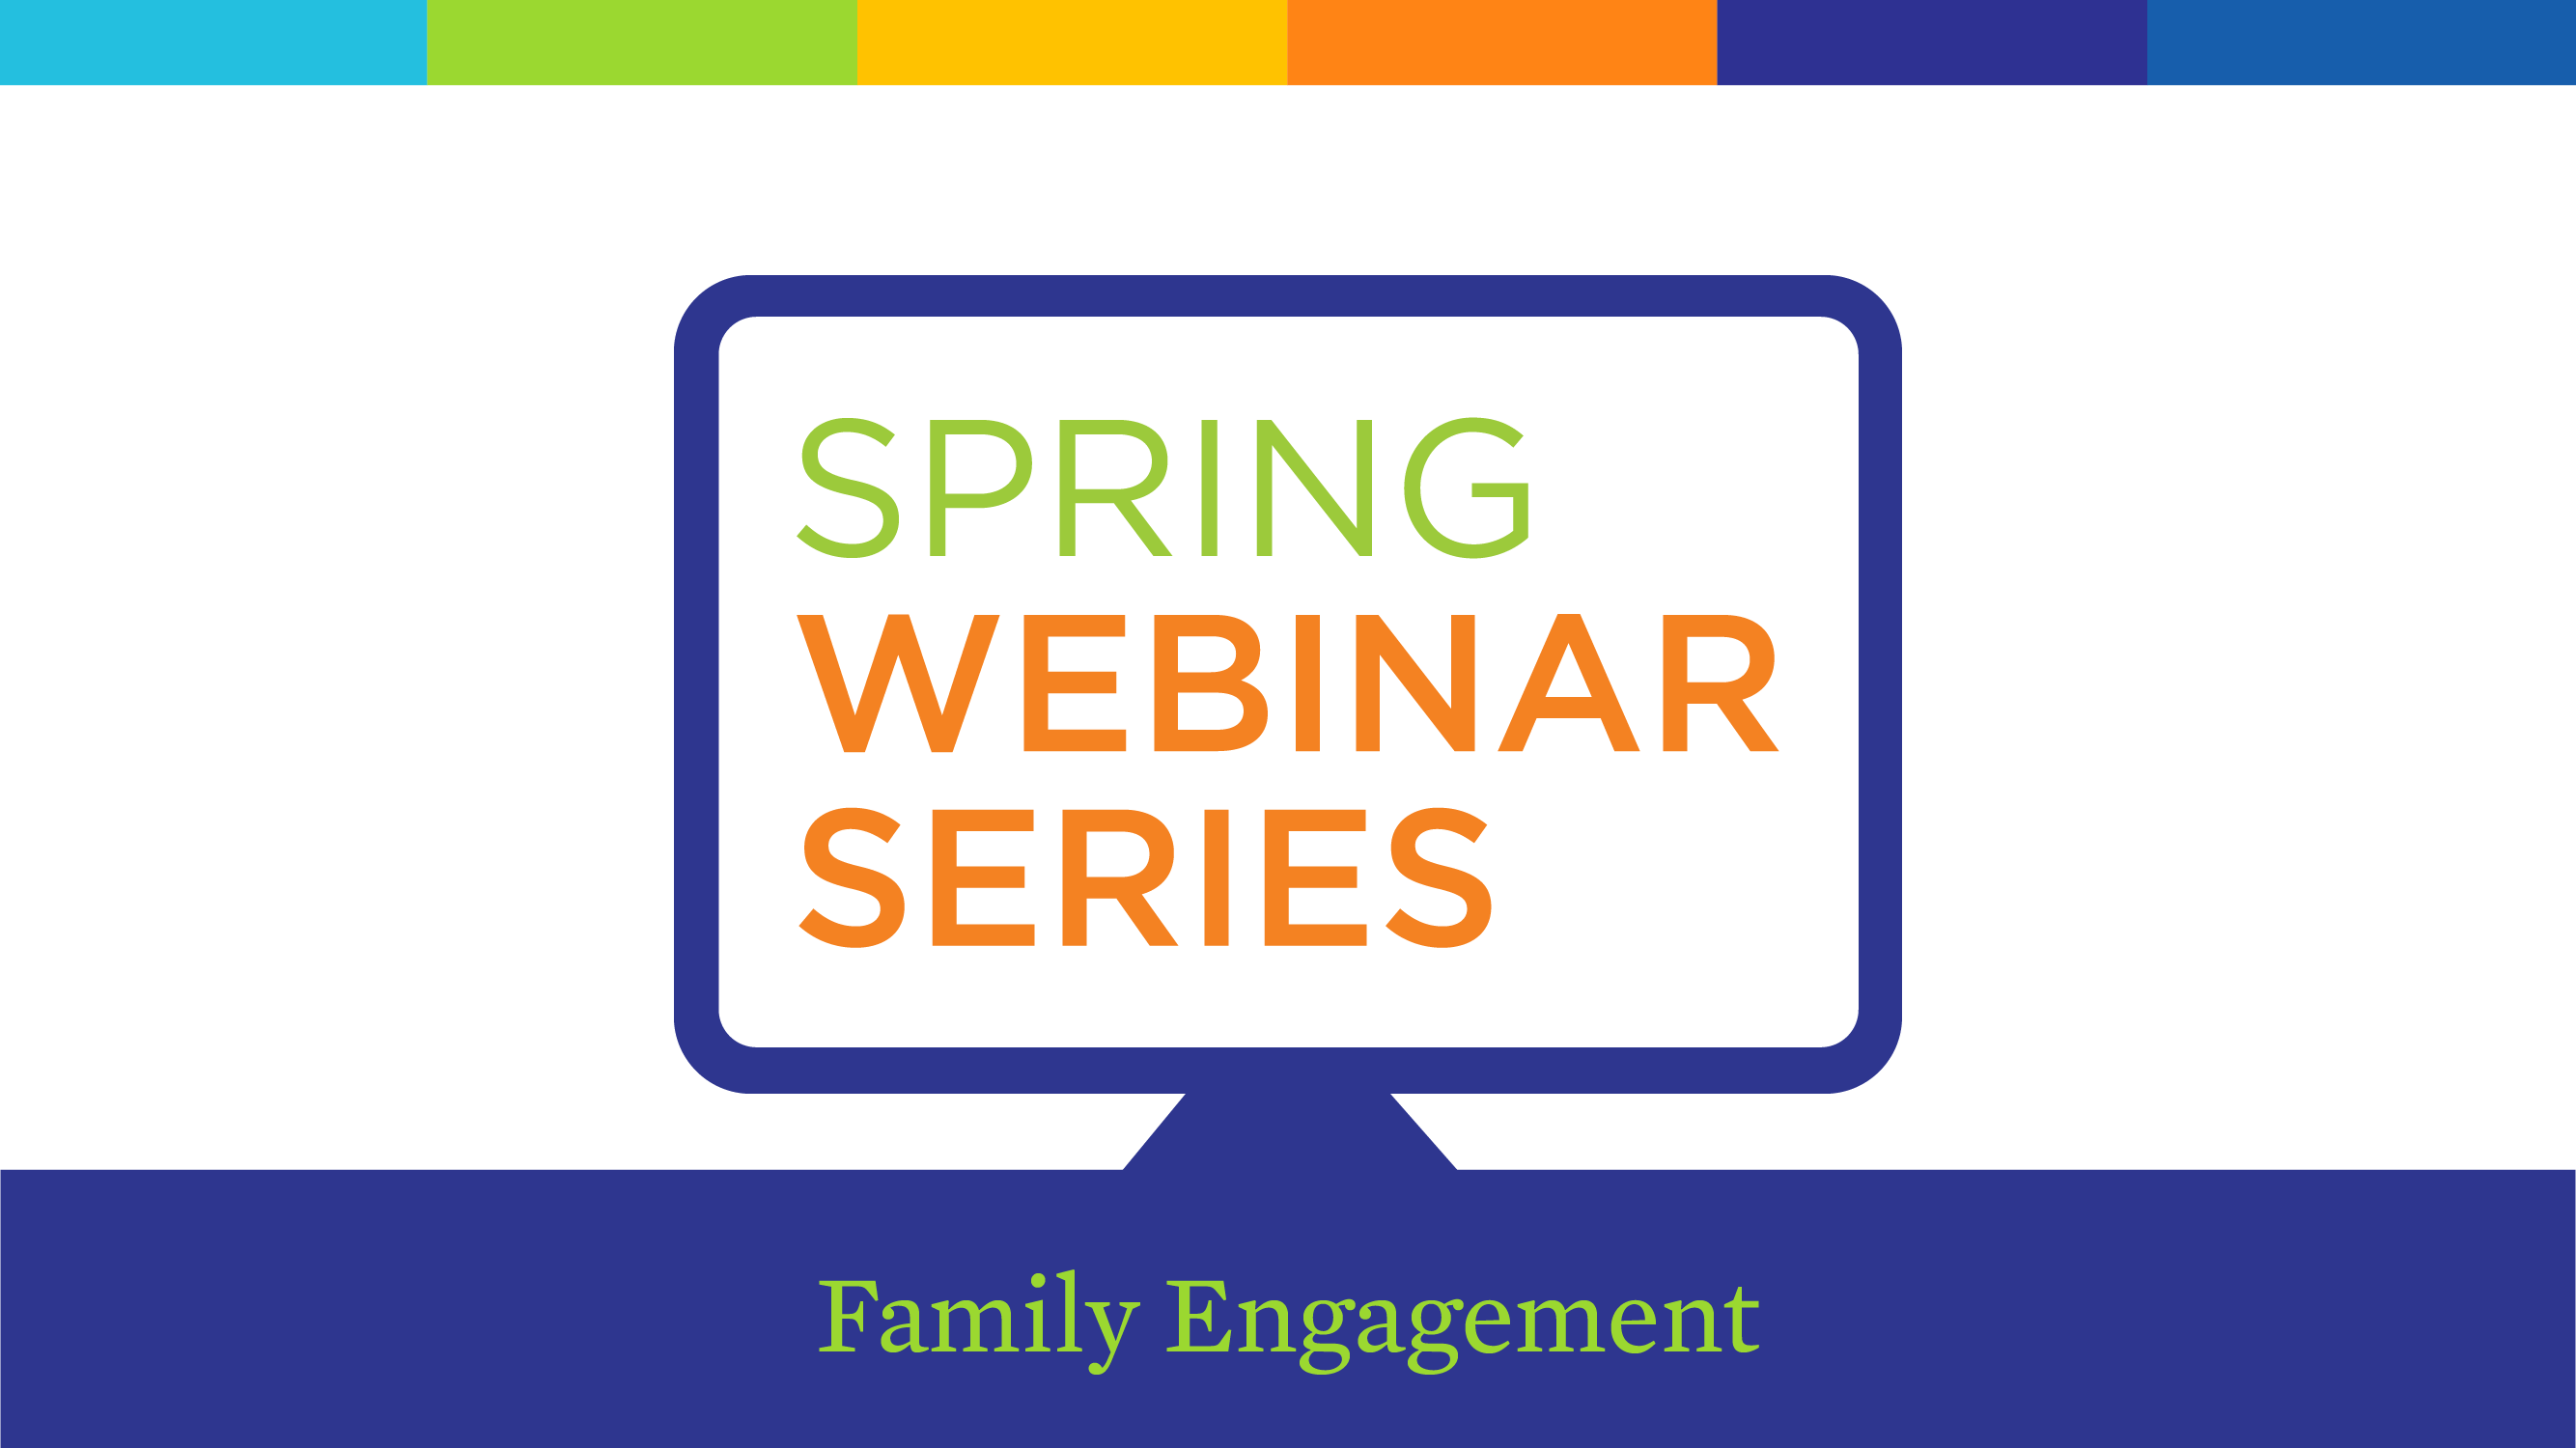 Family Engagement Theme in the Early Learning Network's Spring Webinar Series